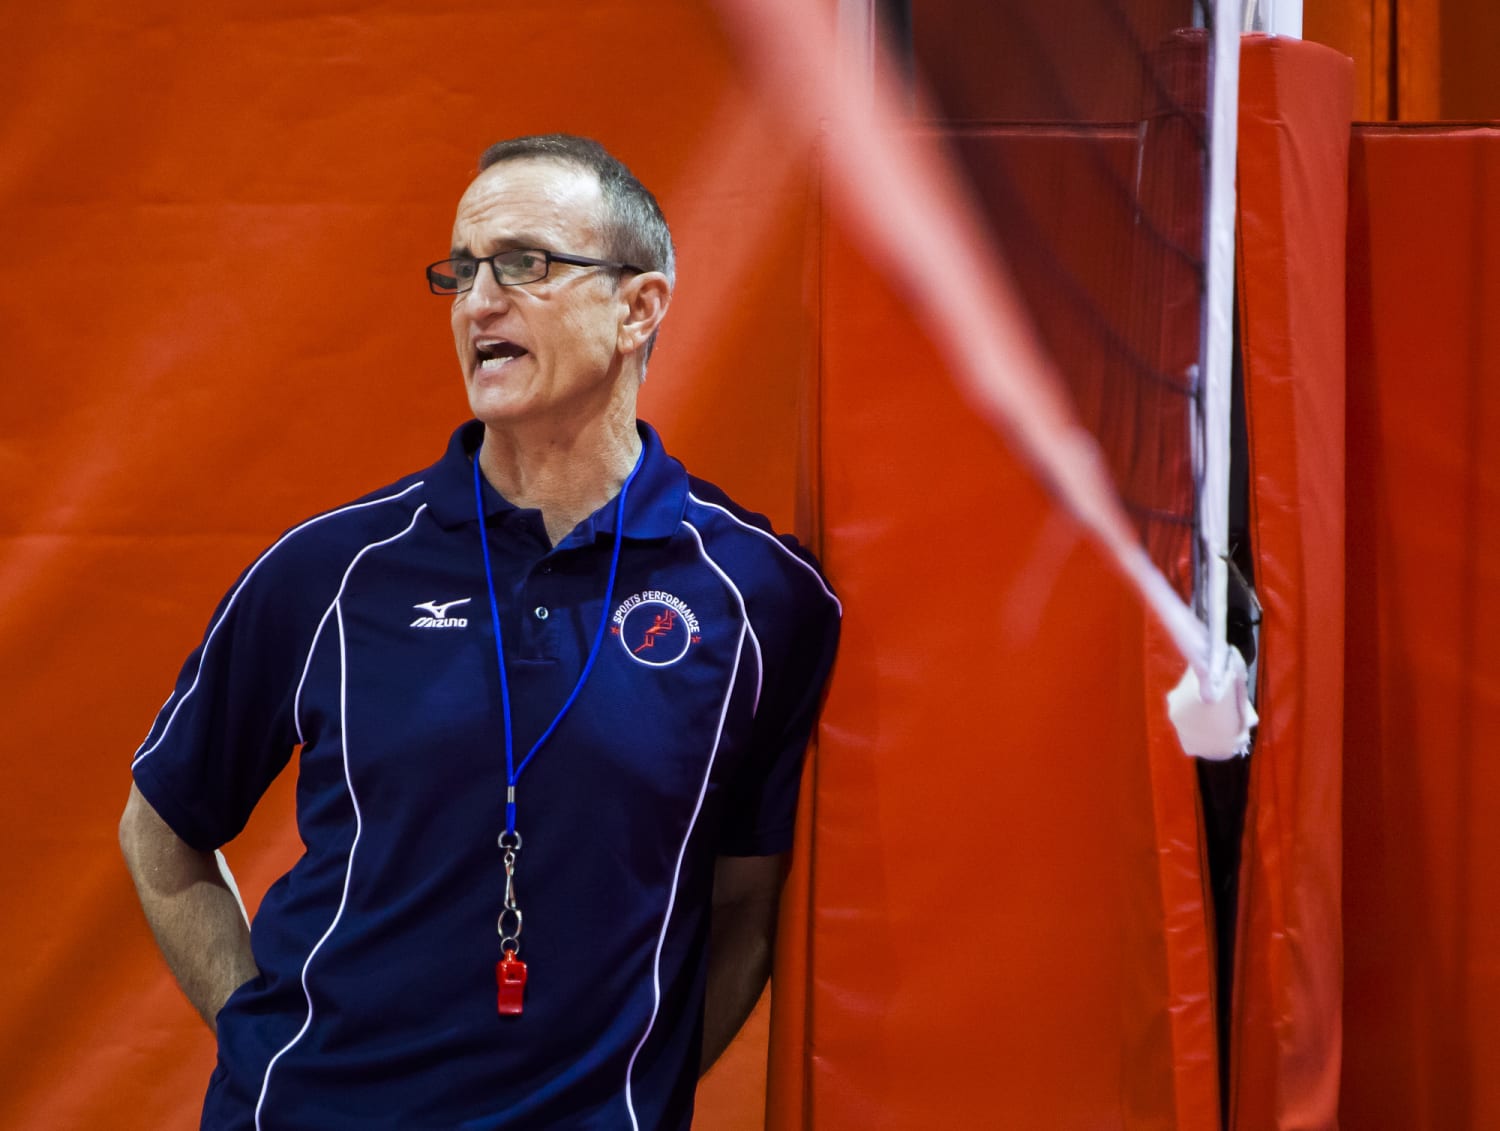 1500px x 1131px - Top youth volleyball coach was accused of raping players in the 1980s, yet  still trained kids, lawsuit charges